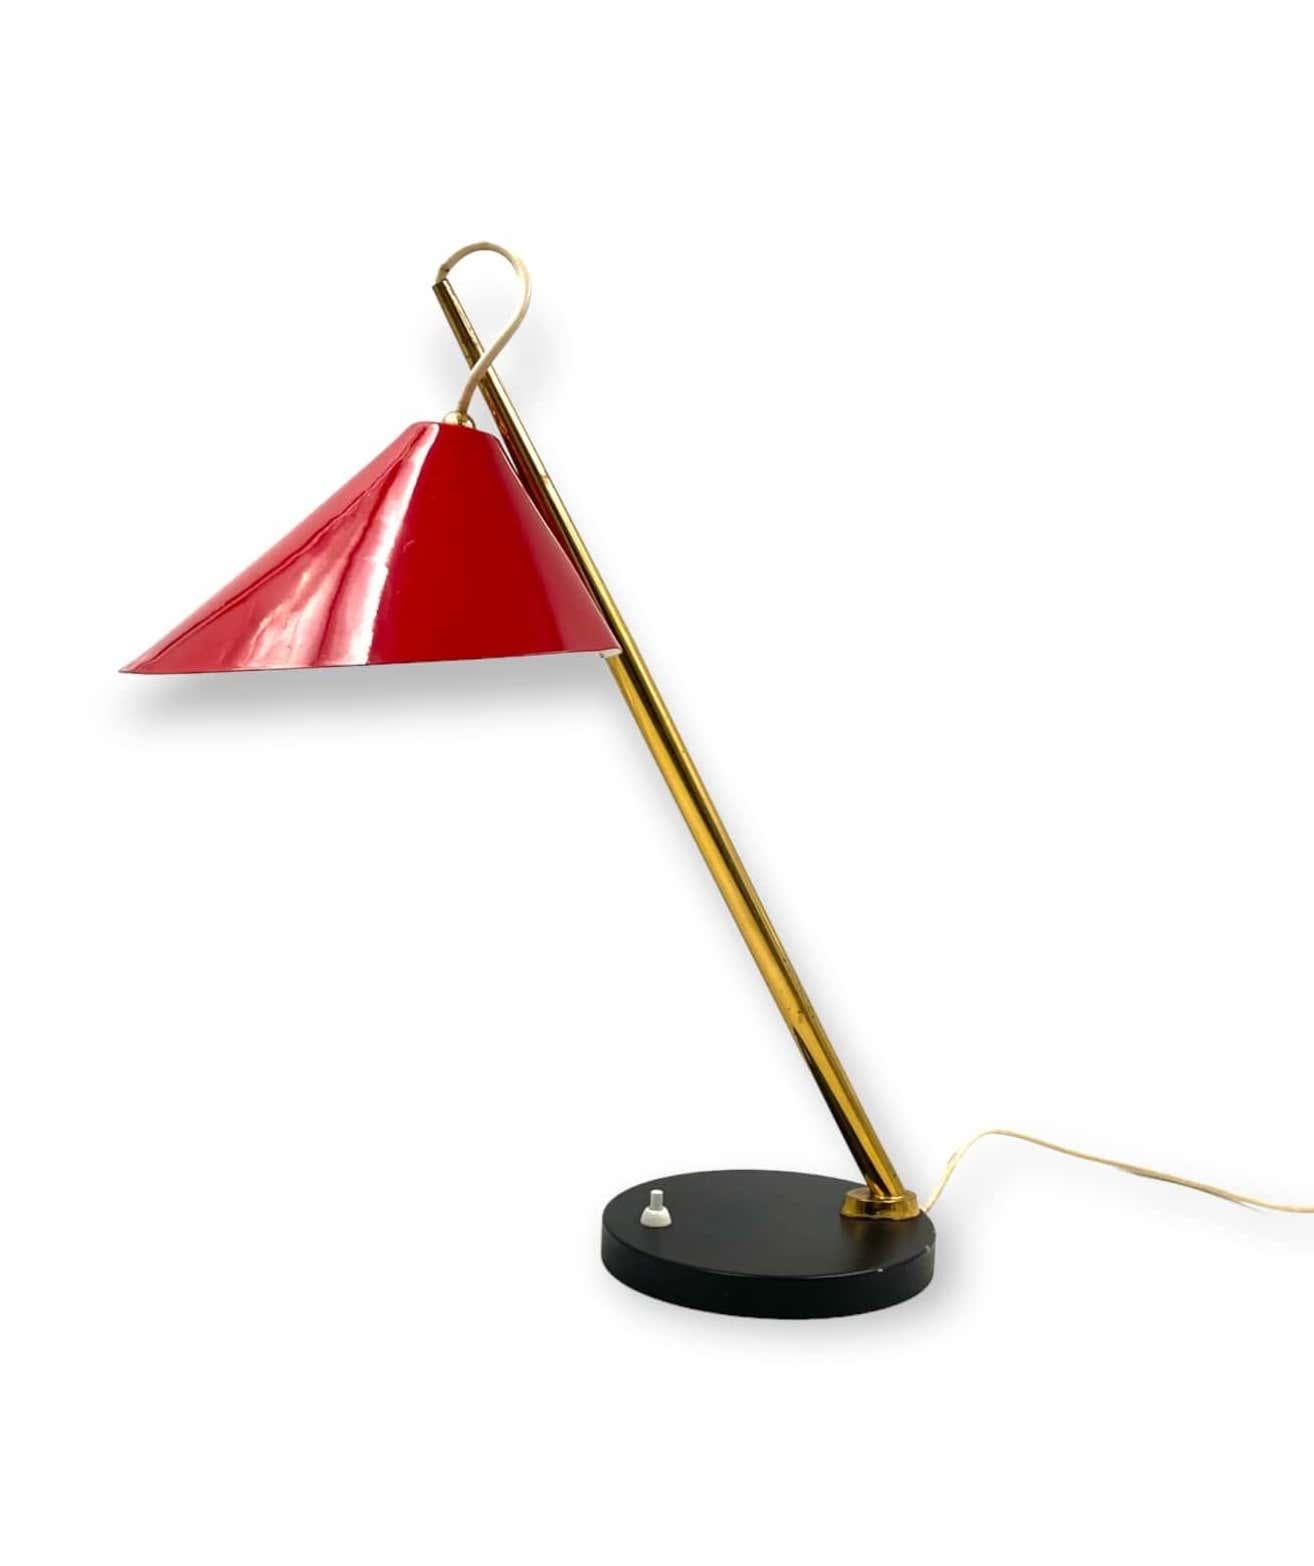 Midcentury Red Table Lamp, Lumen, Italy, 1960s For Sale 4